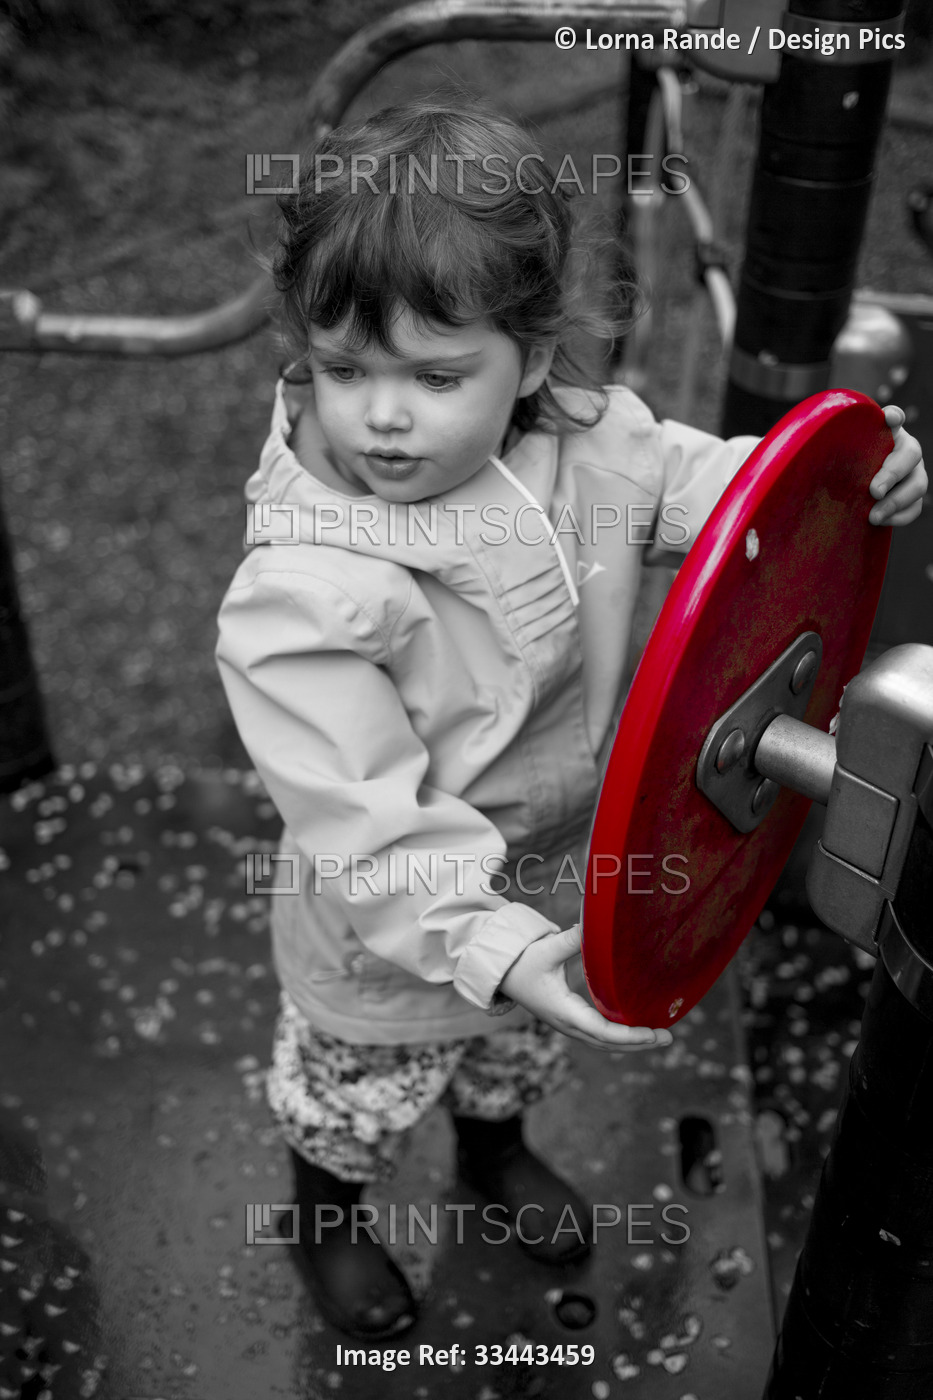 Black and white image of a preschooler girl at a playground with a vibrant red ...